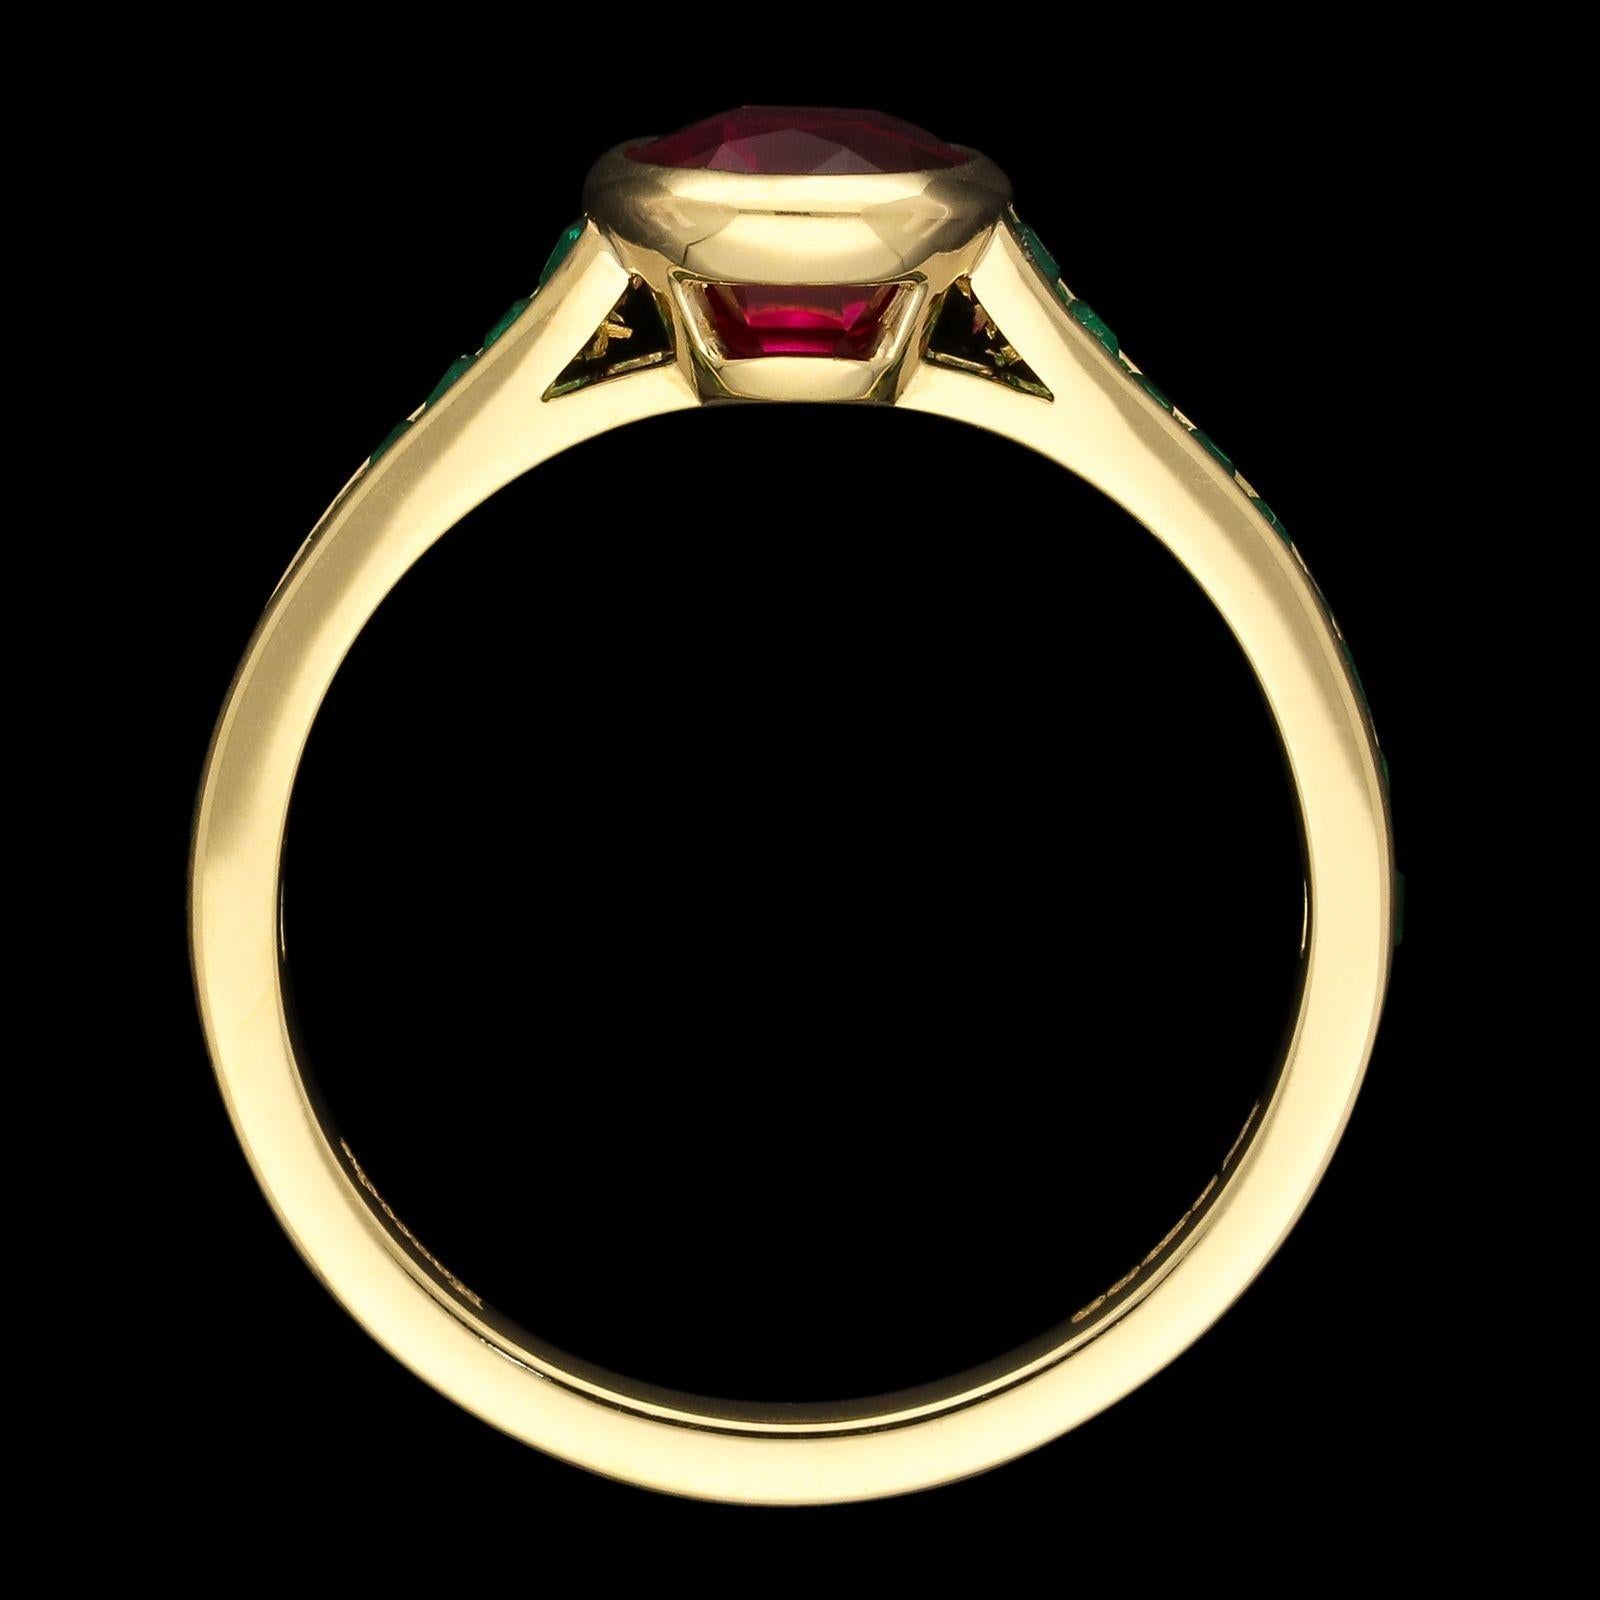 Hancocks 1.58ct Burmese Ruby And Emerald Ring In 18ct Yellow Gold Contemporary In New Condition For Sale In London, GB